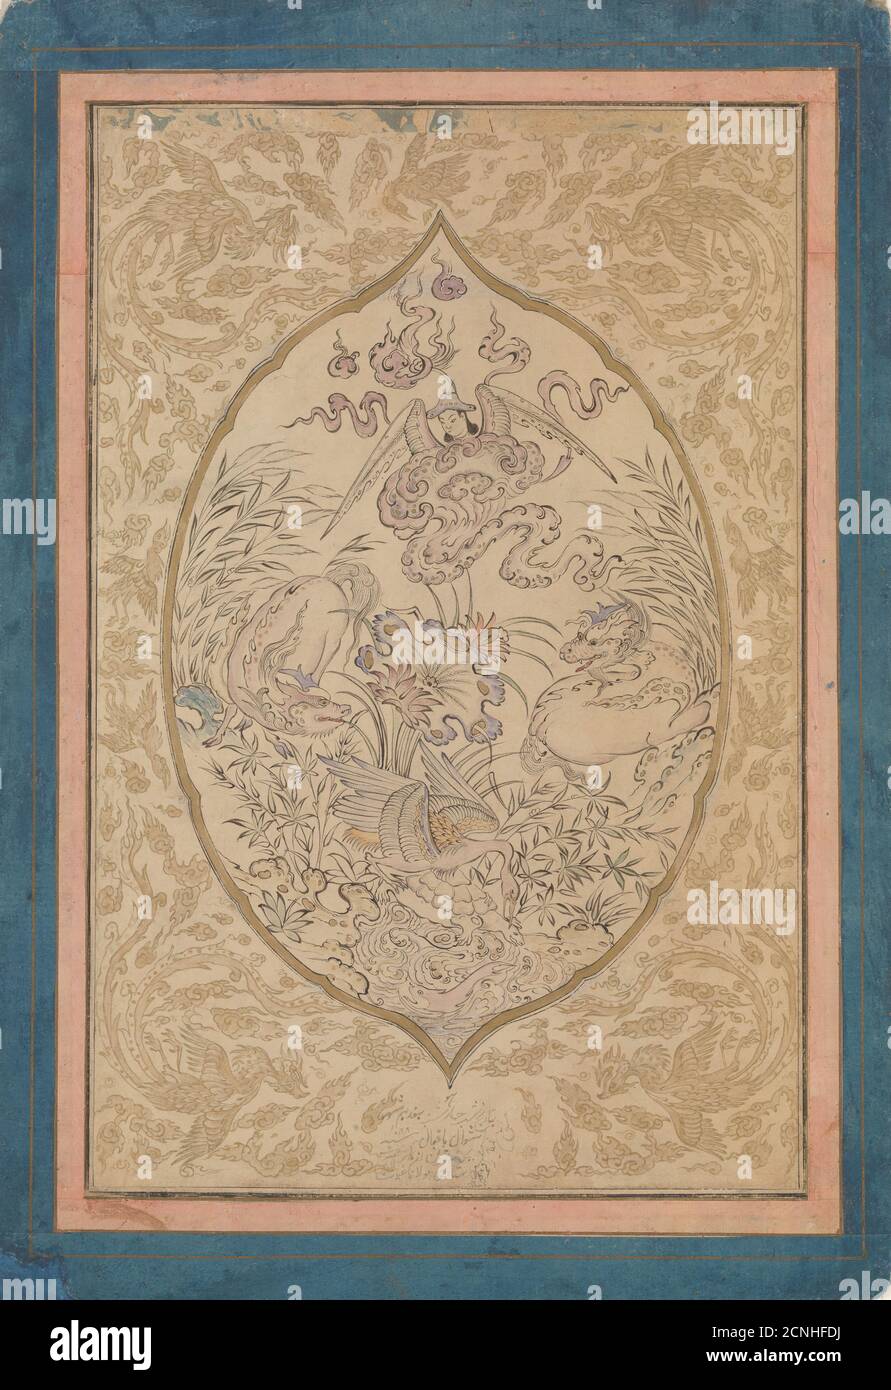 A Gathering of Mythical Creatures around a Lotus Leaf, dated Shawwal A.H. 1088/A.D. 1677. Stock Photo